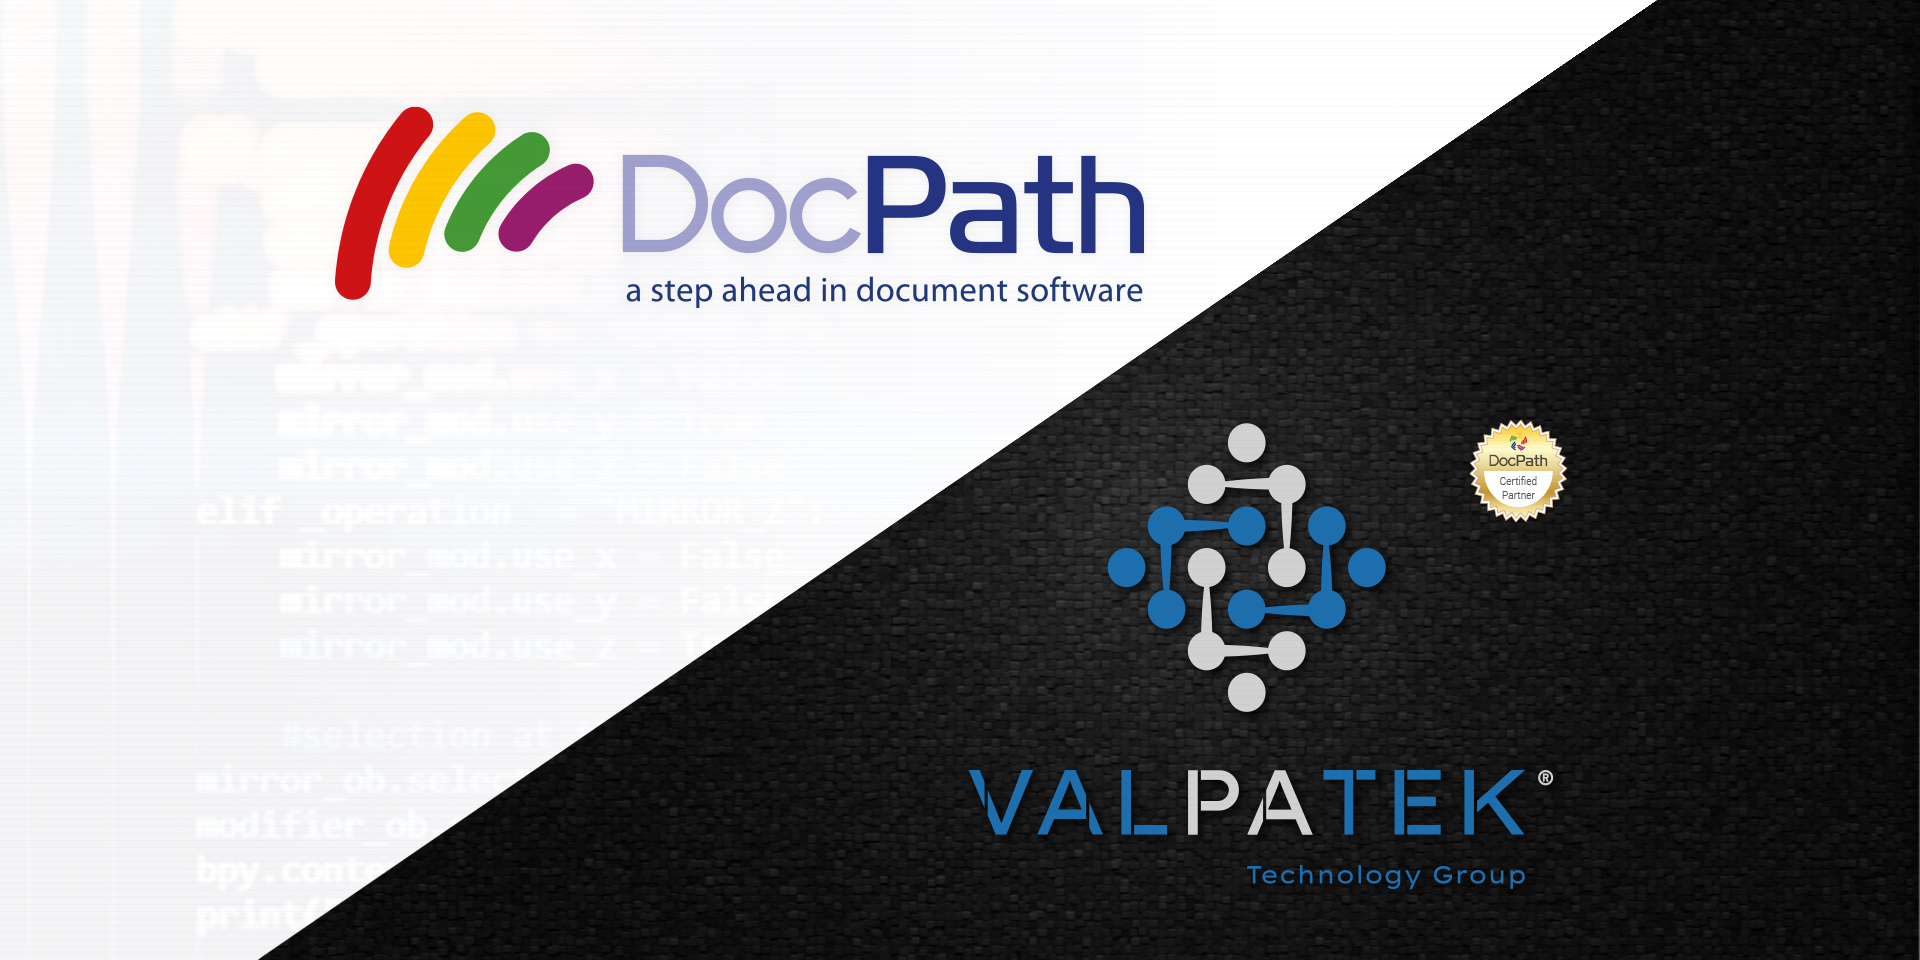 The Valpatek Technology Group will be implementing DocPath's document technology. This new partnership reinforces DocPath’s document software competitive advantage 